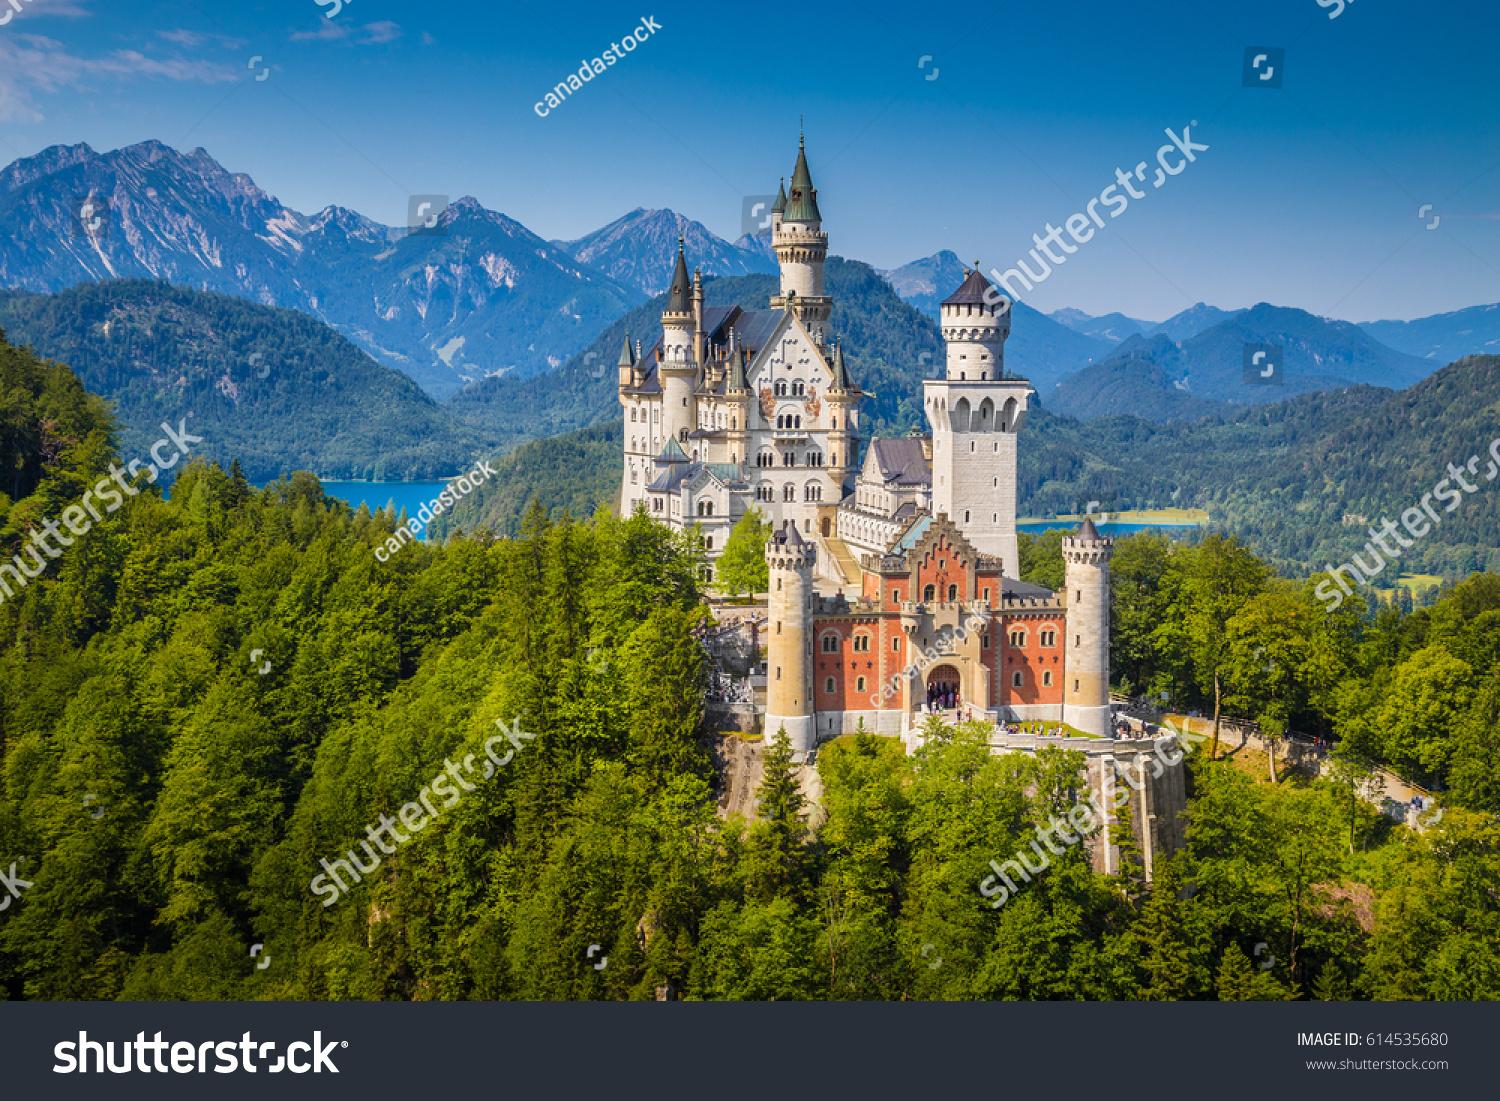 Beautiful view of world-famous Neuschwanstein Castle, the nineteenth-century Romanesque Revival palace built for King Ludwig II on a rugged cliff near Fussen, southwest Bavaria, Germany #614535680